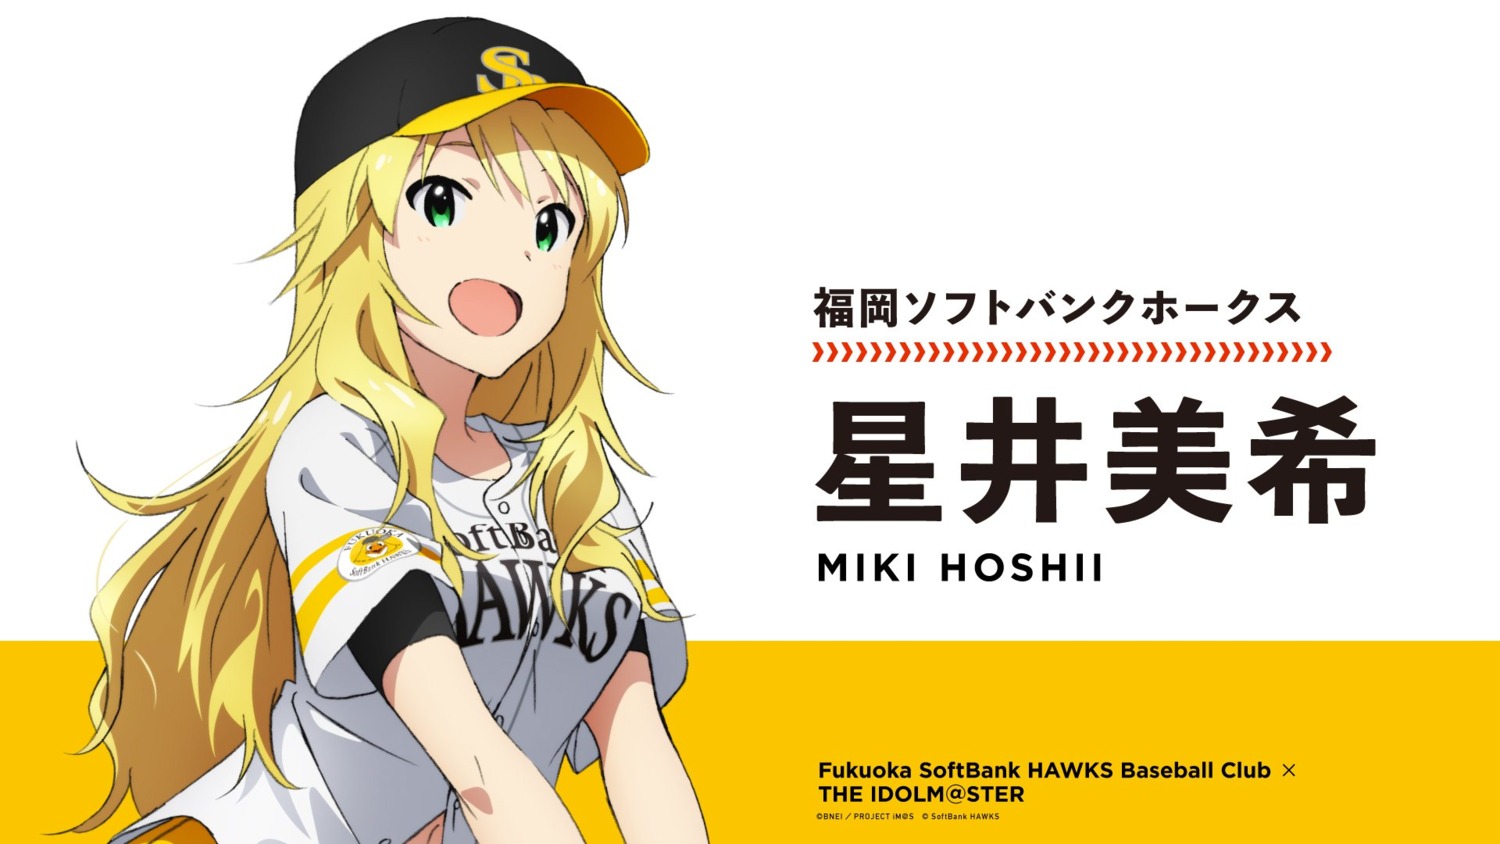 hoshii_miki the_idolm@ster wallpaper